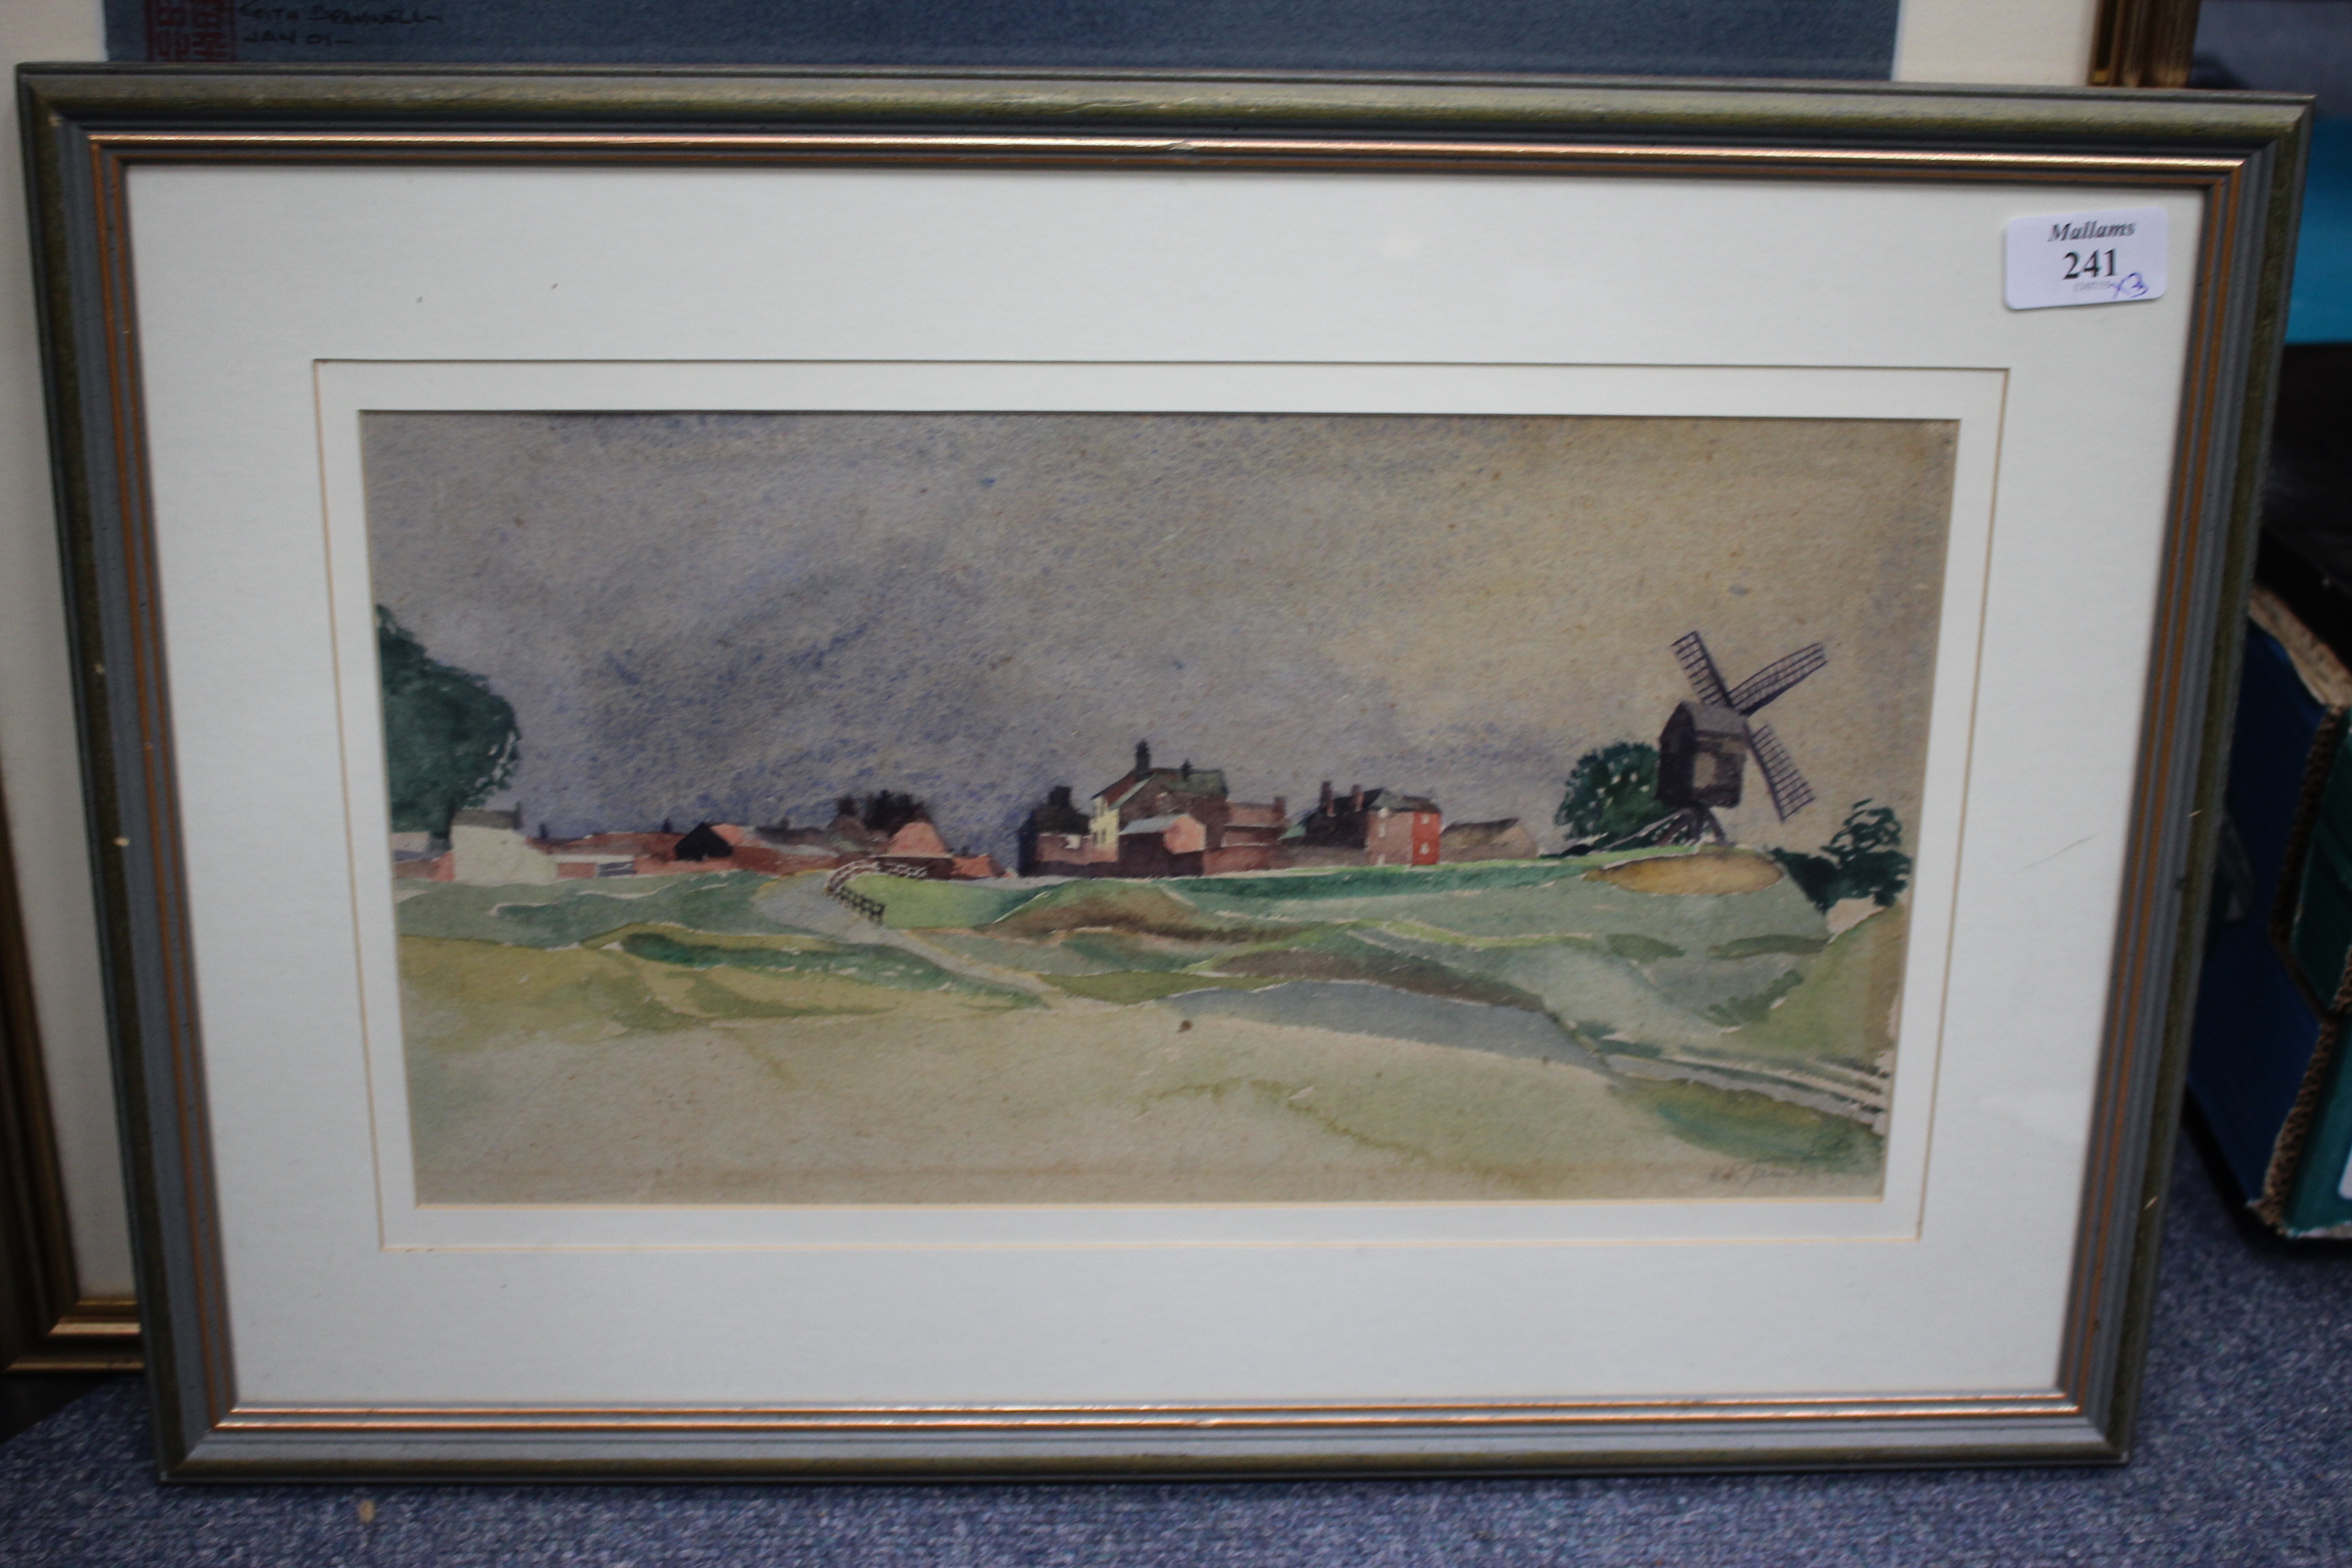 KEITH BRAMWELL (EARLY 21ST CENTURY ENGLISH SCHOOL) 'PEACE & CALM' WATERCOLOUR signed and inscribed